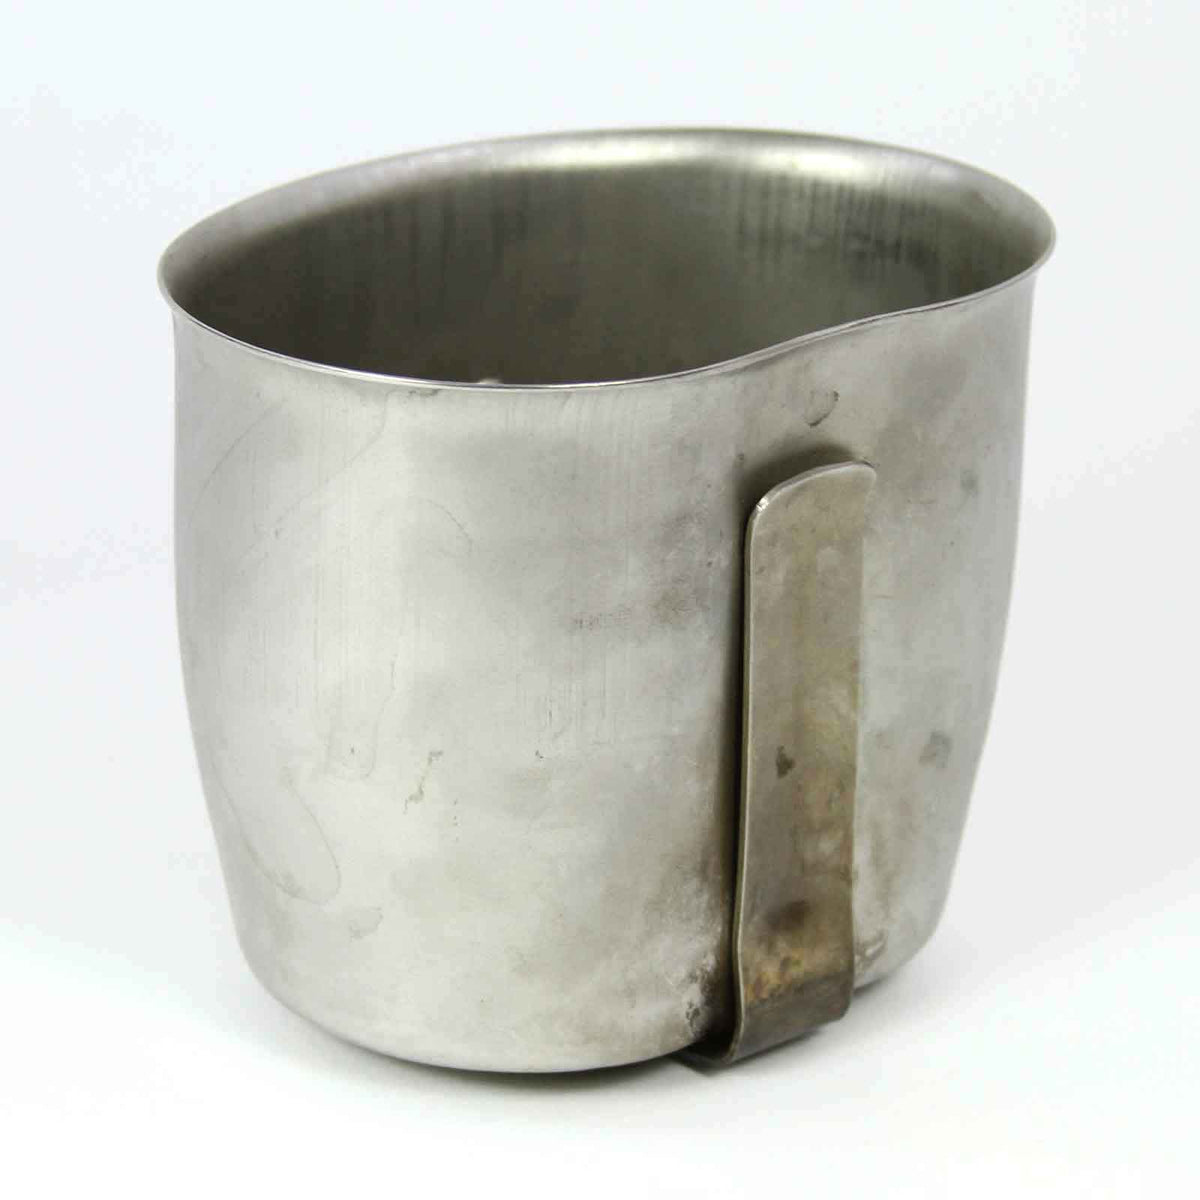 AUSTRIAN ARMY CANTEEN CUP